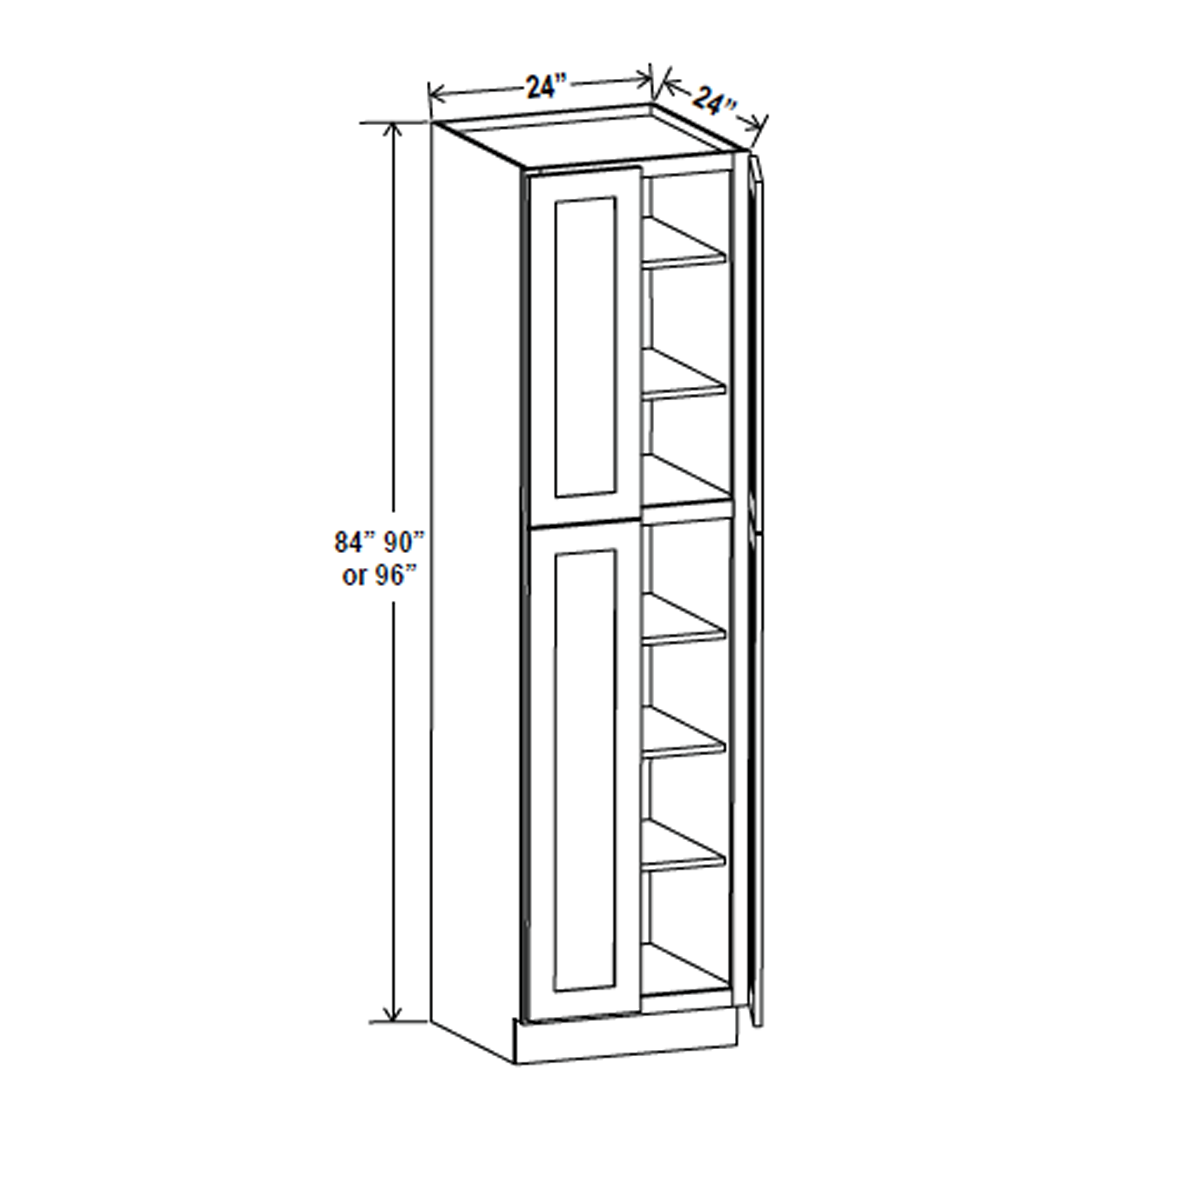 Wall Pantry Cabinet - 24W x 90H x 24D - Blue Shaker Cabinet - RTA